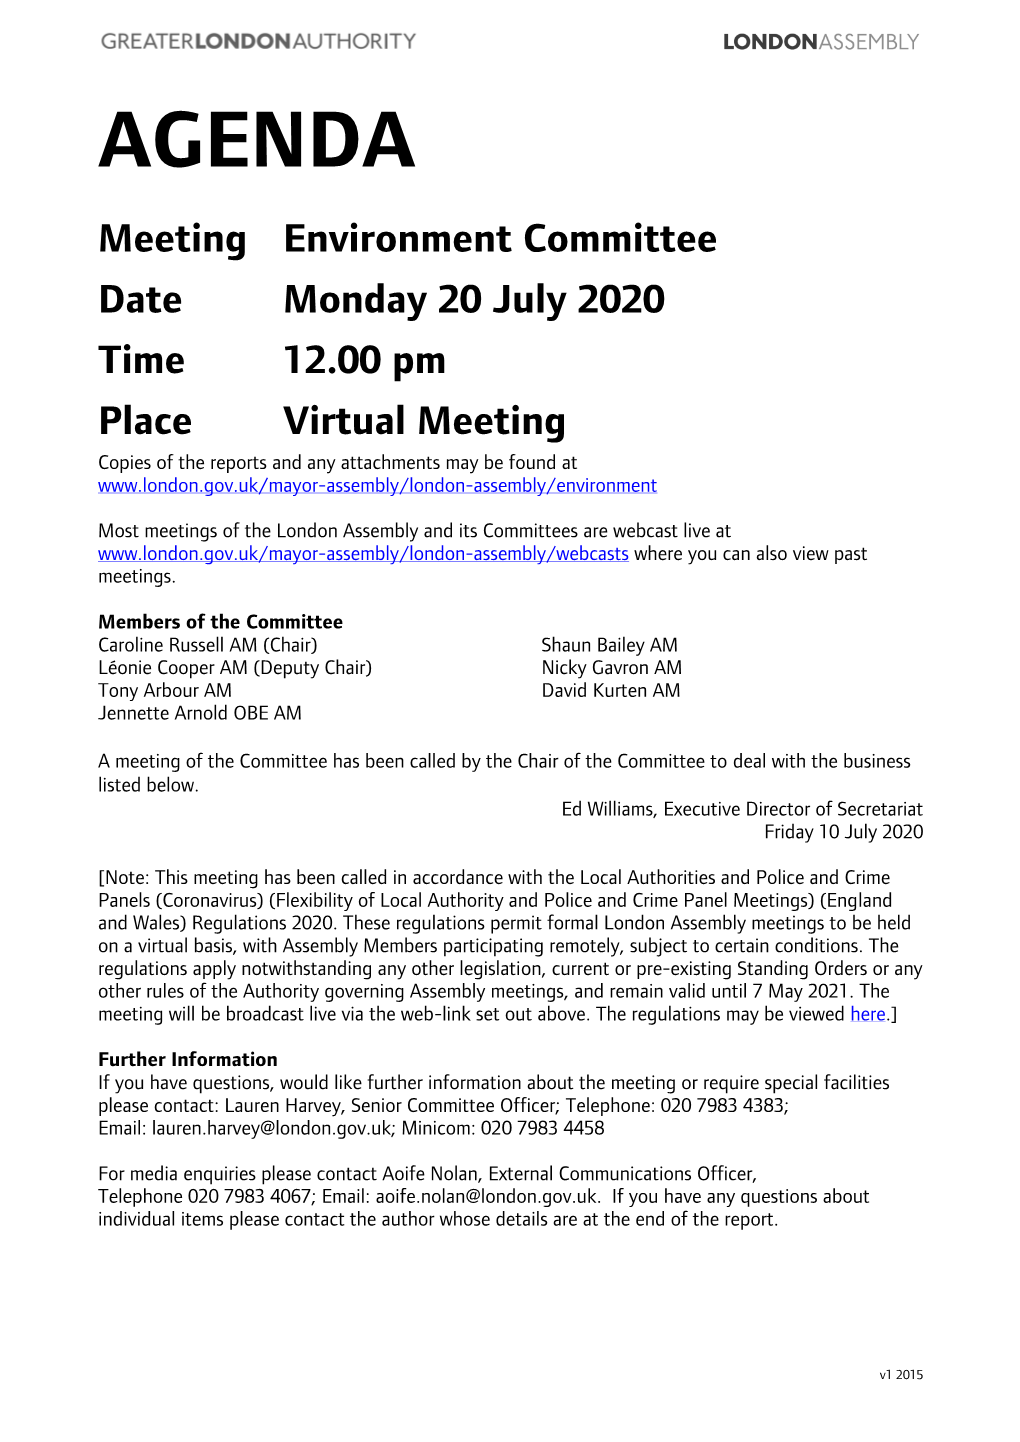 (Public Pack)Agenda Document for Environment Committee, 20/07/2020 12:00